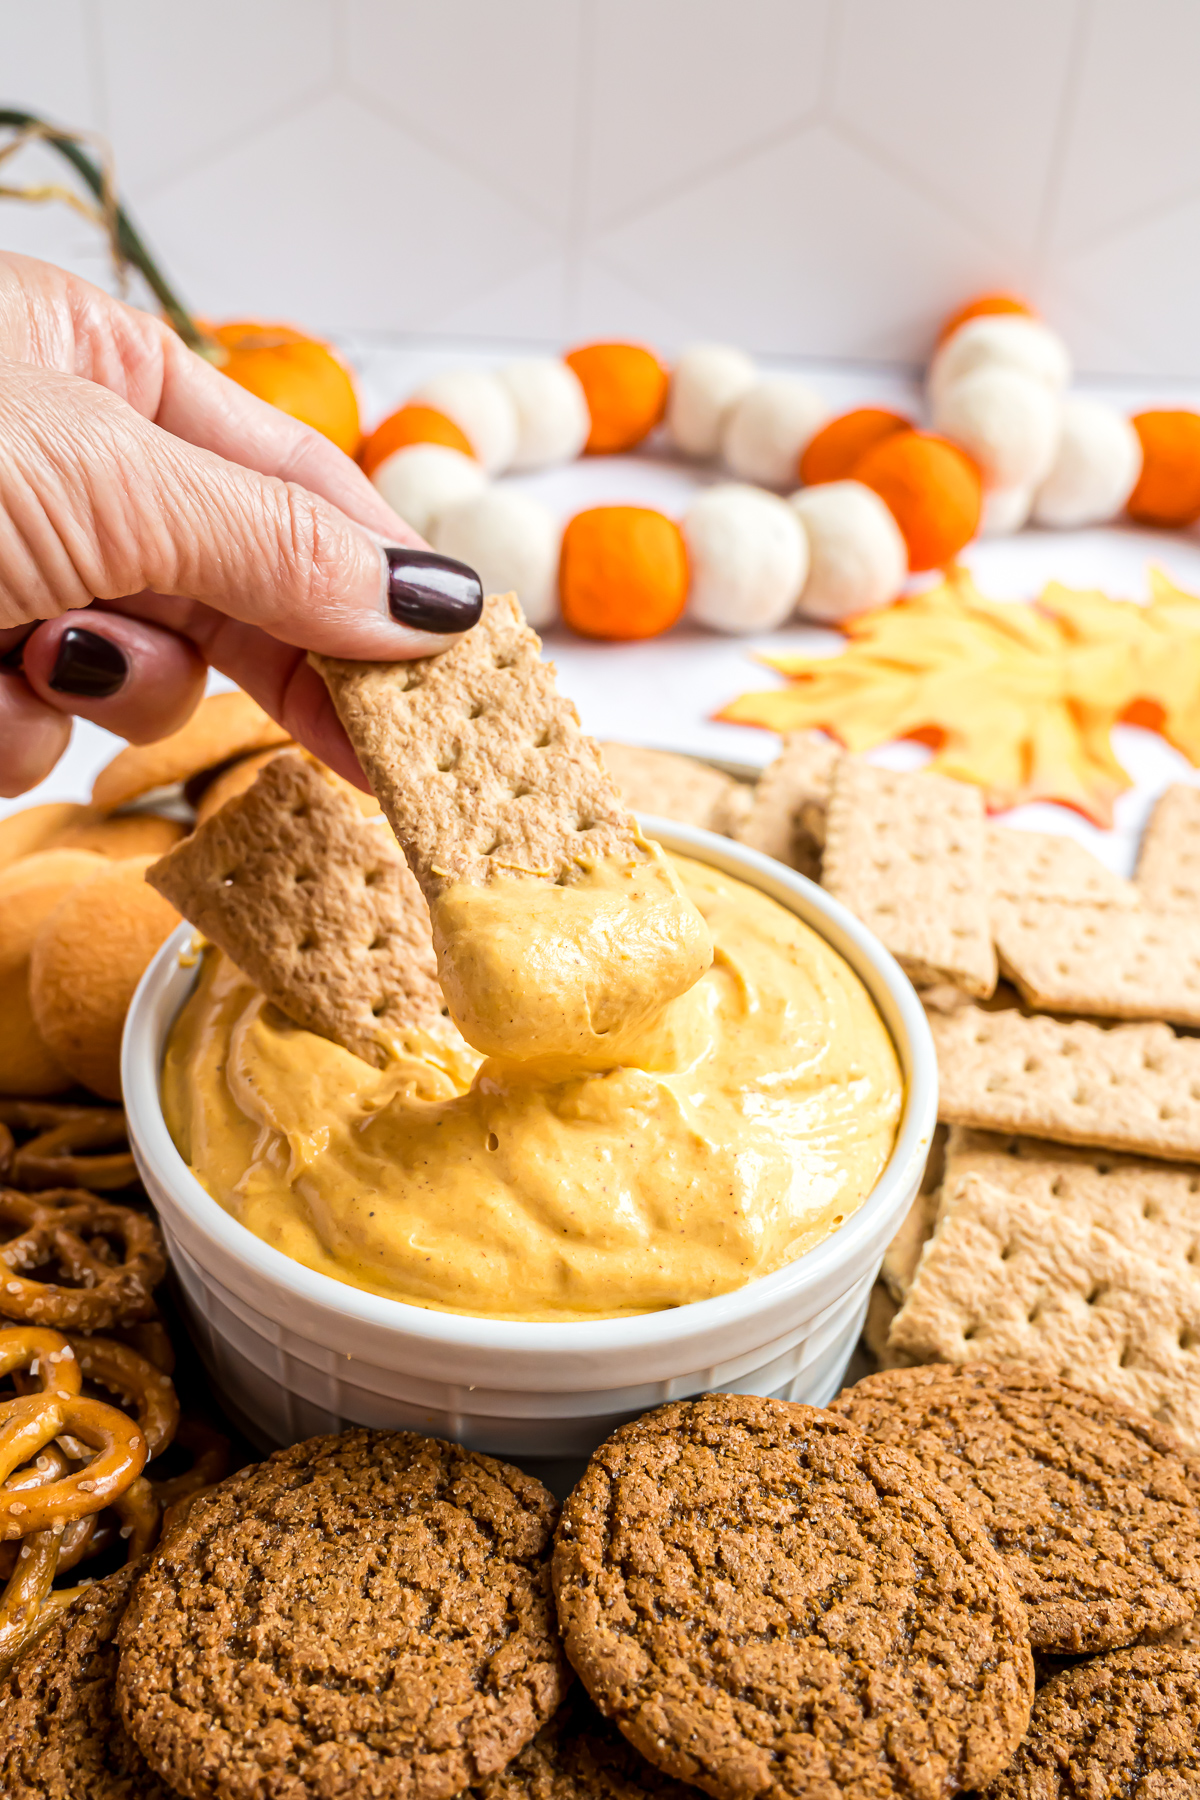 Graham crackers being dipped into the pumpkin fluff showing the creamy texture of the dip.